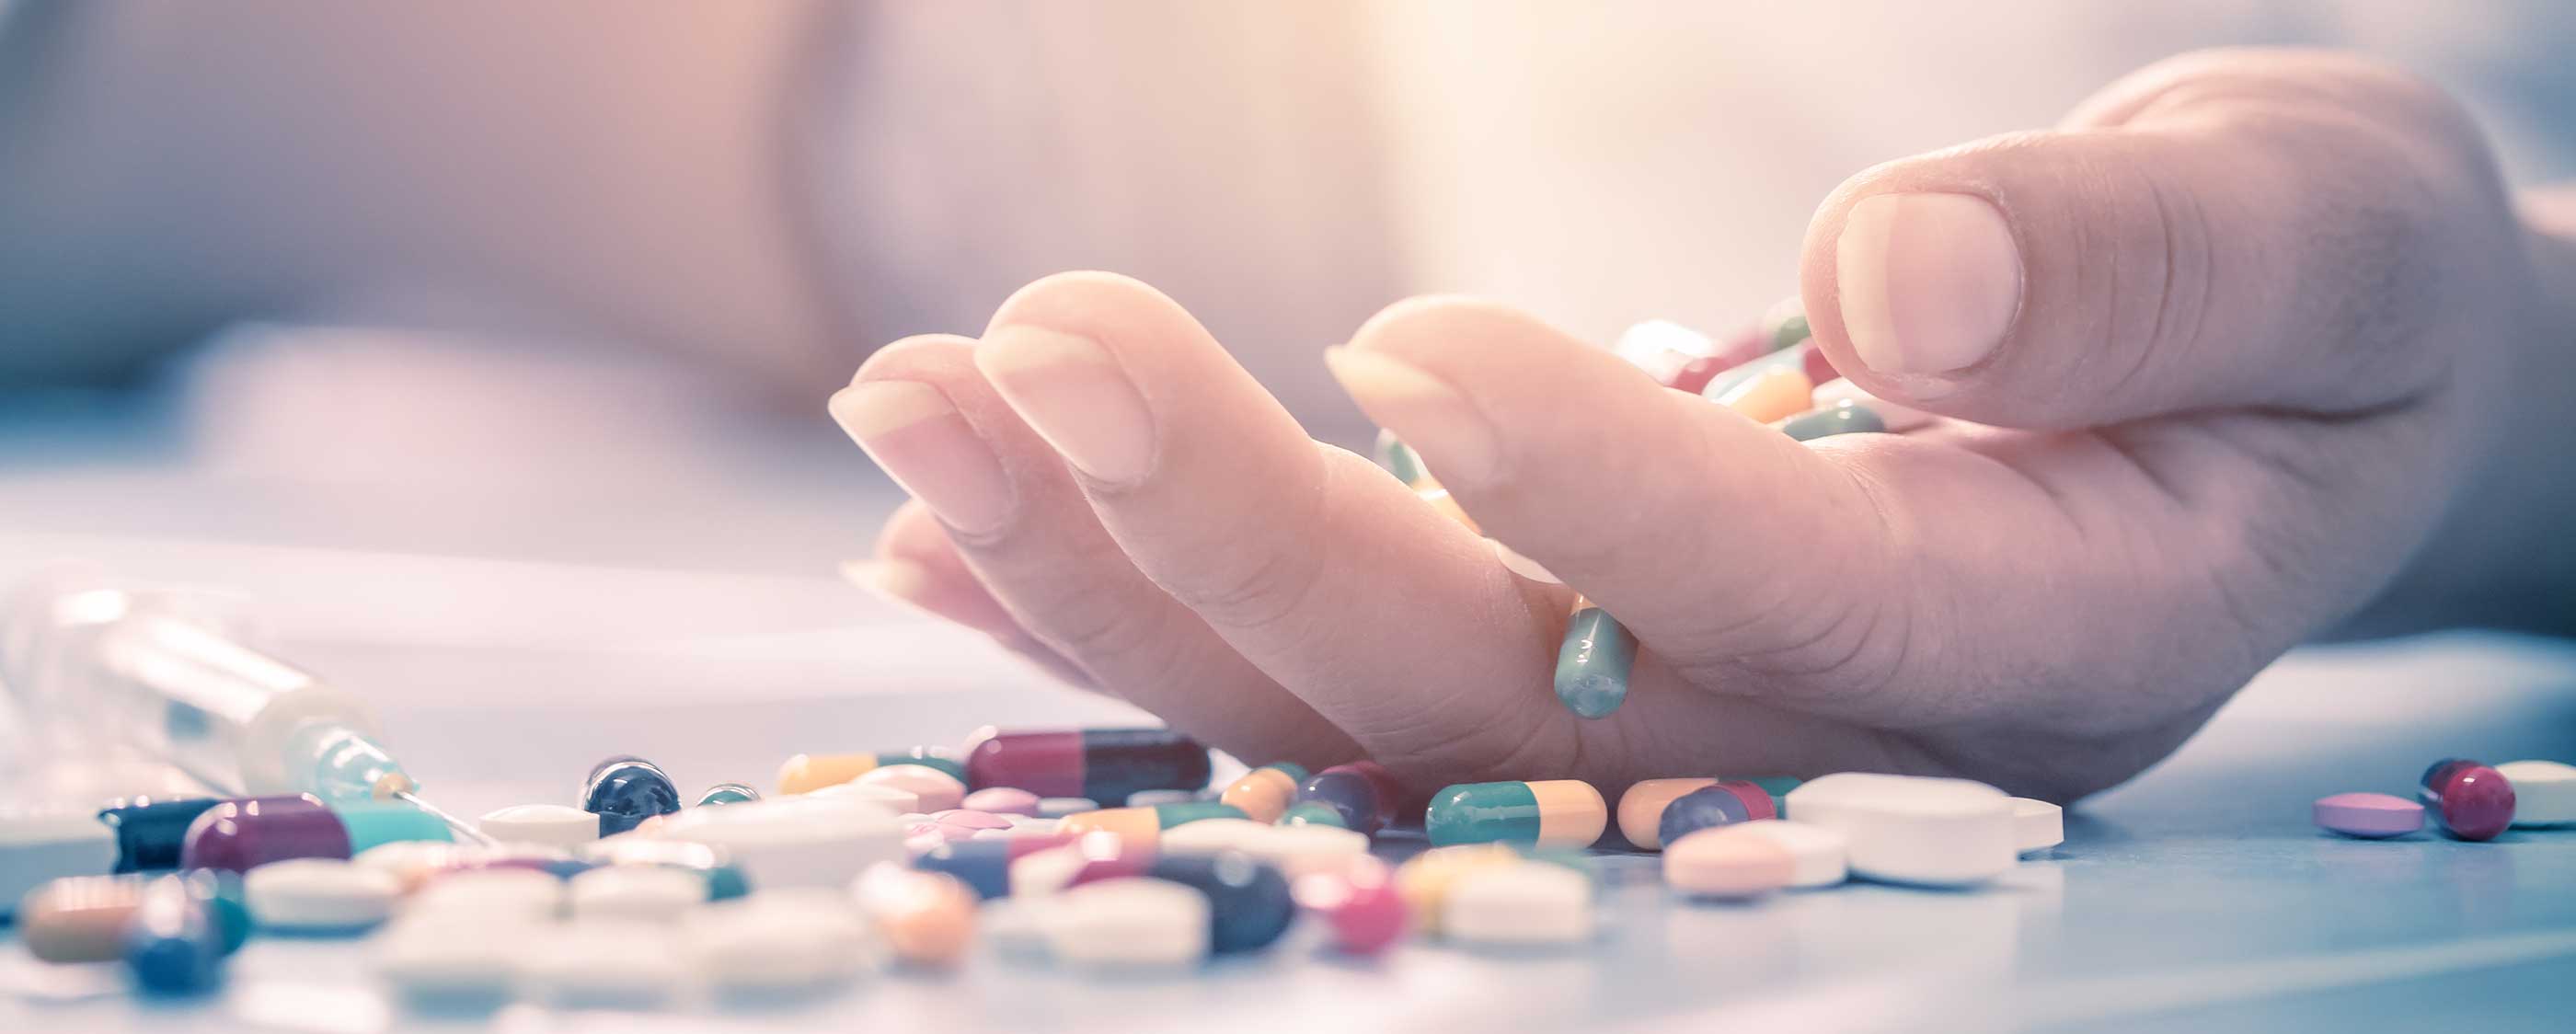 Can You Overdose on Vyvanse? | American Addiction Centers